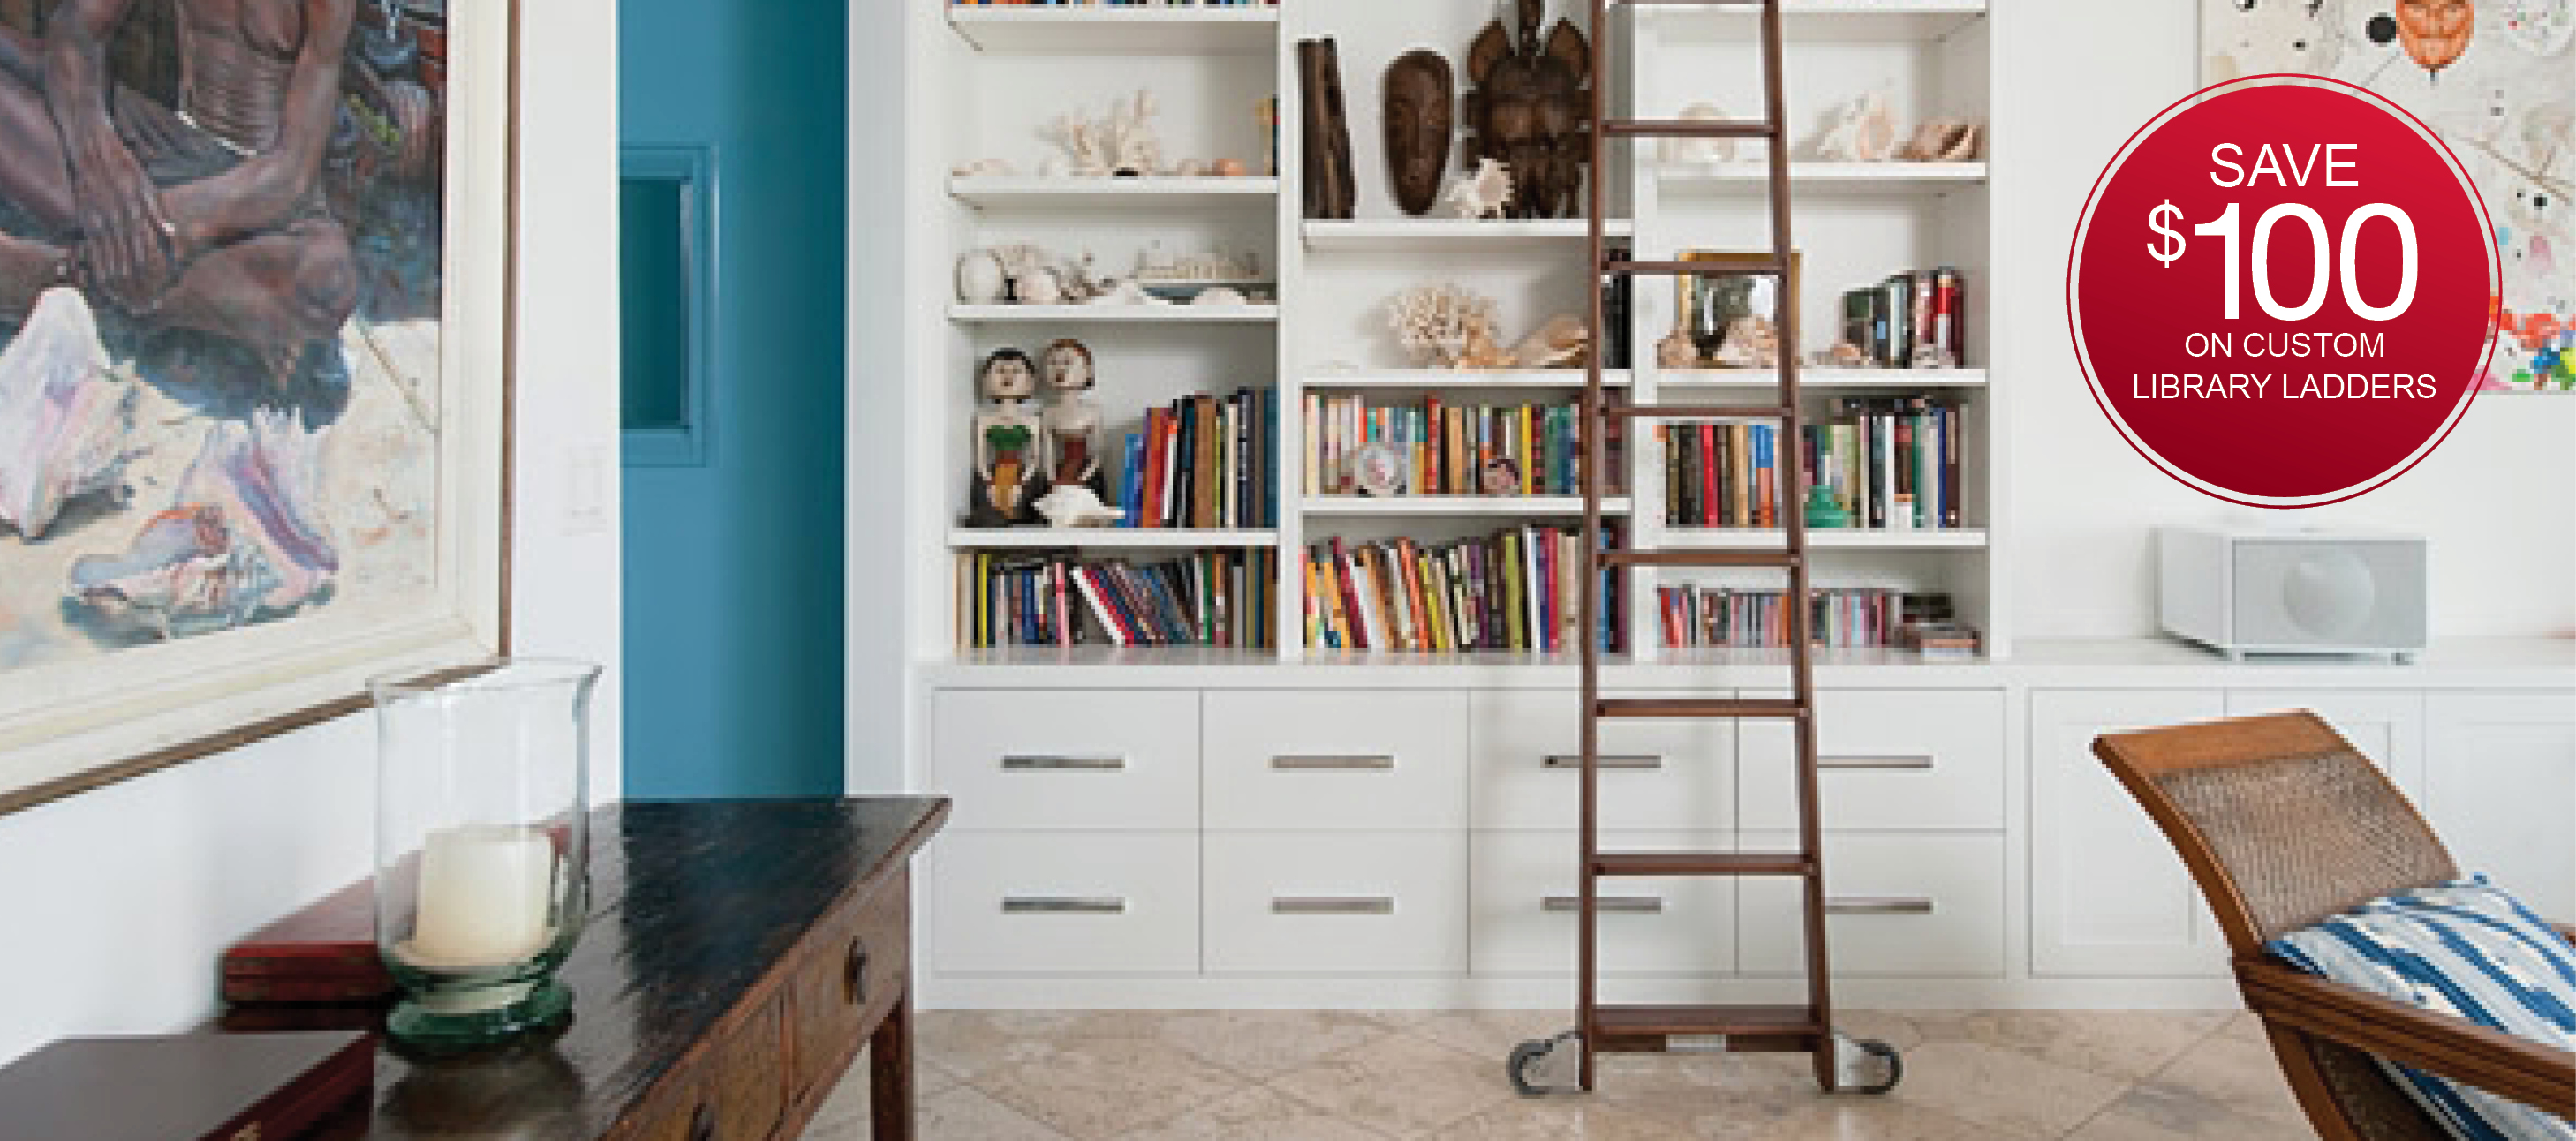 Start your quote for a Custom Library Ladders from Häfele today!